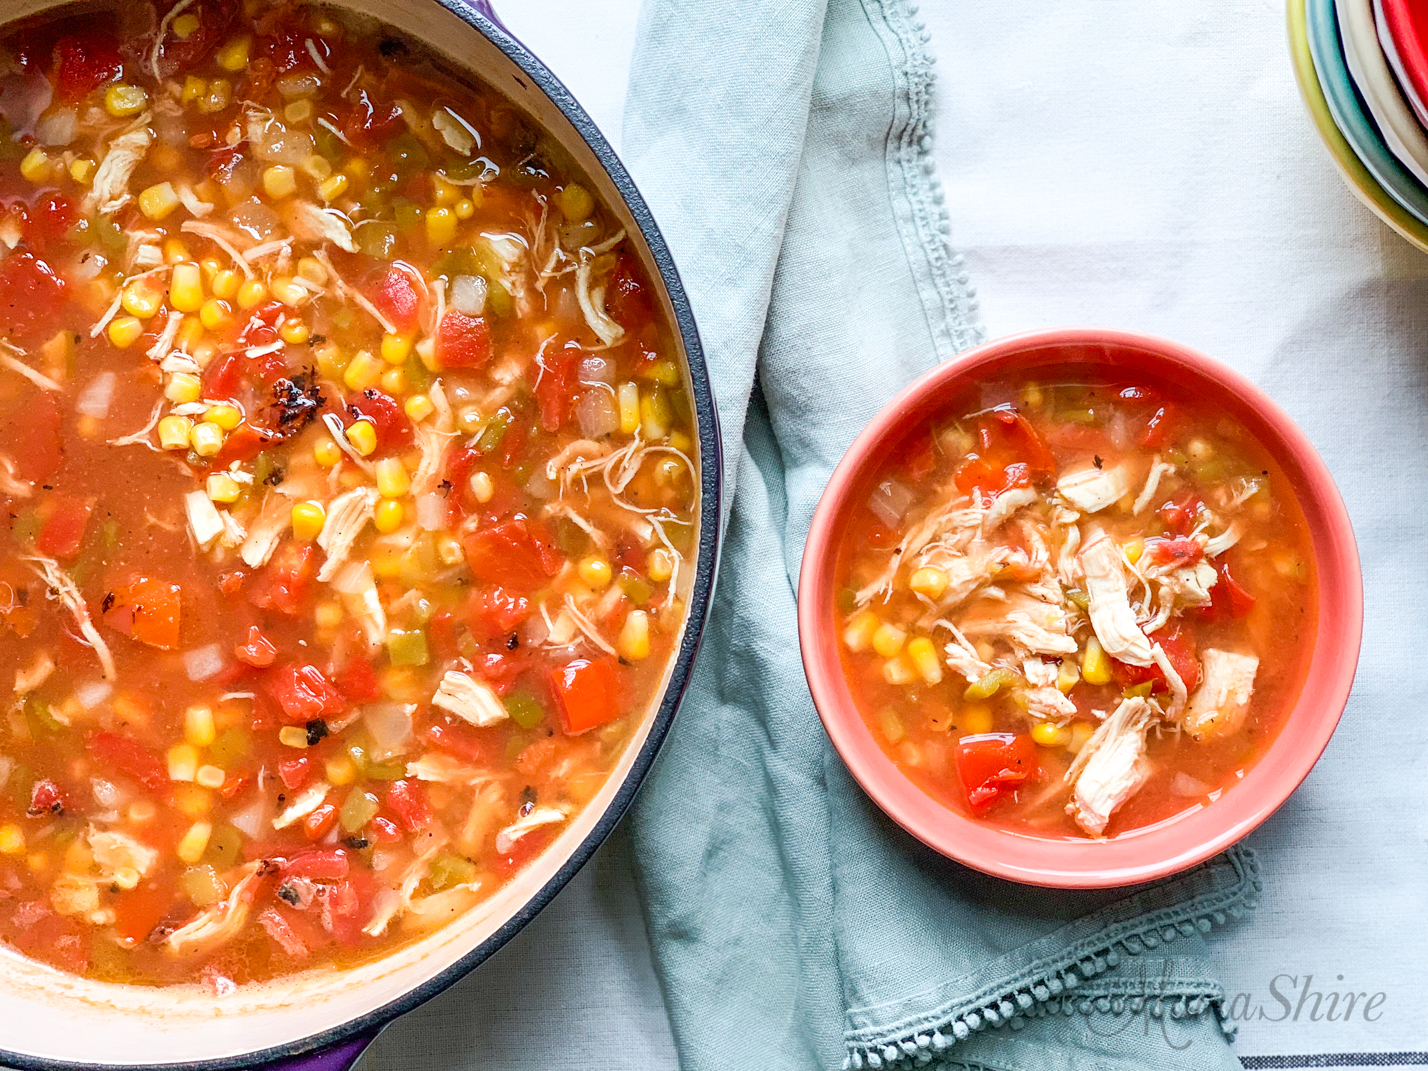 Tasty and easy to make chicken tortilla soup. A serving in a soup bowl and the rest in a large pot.